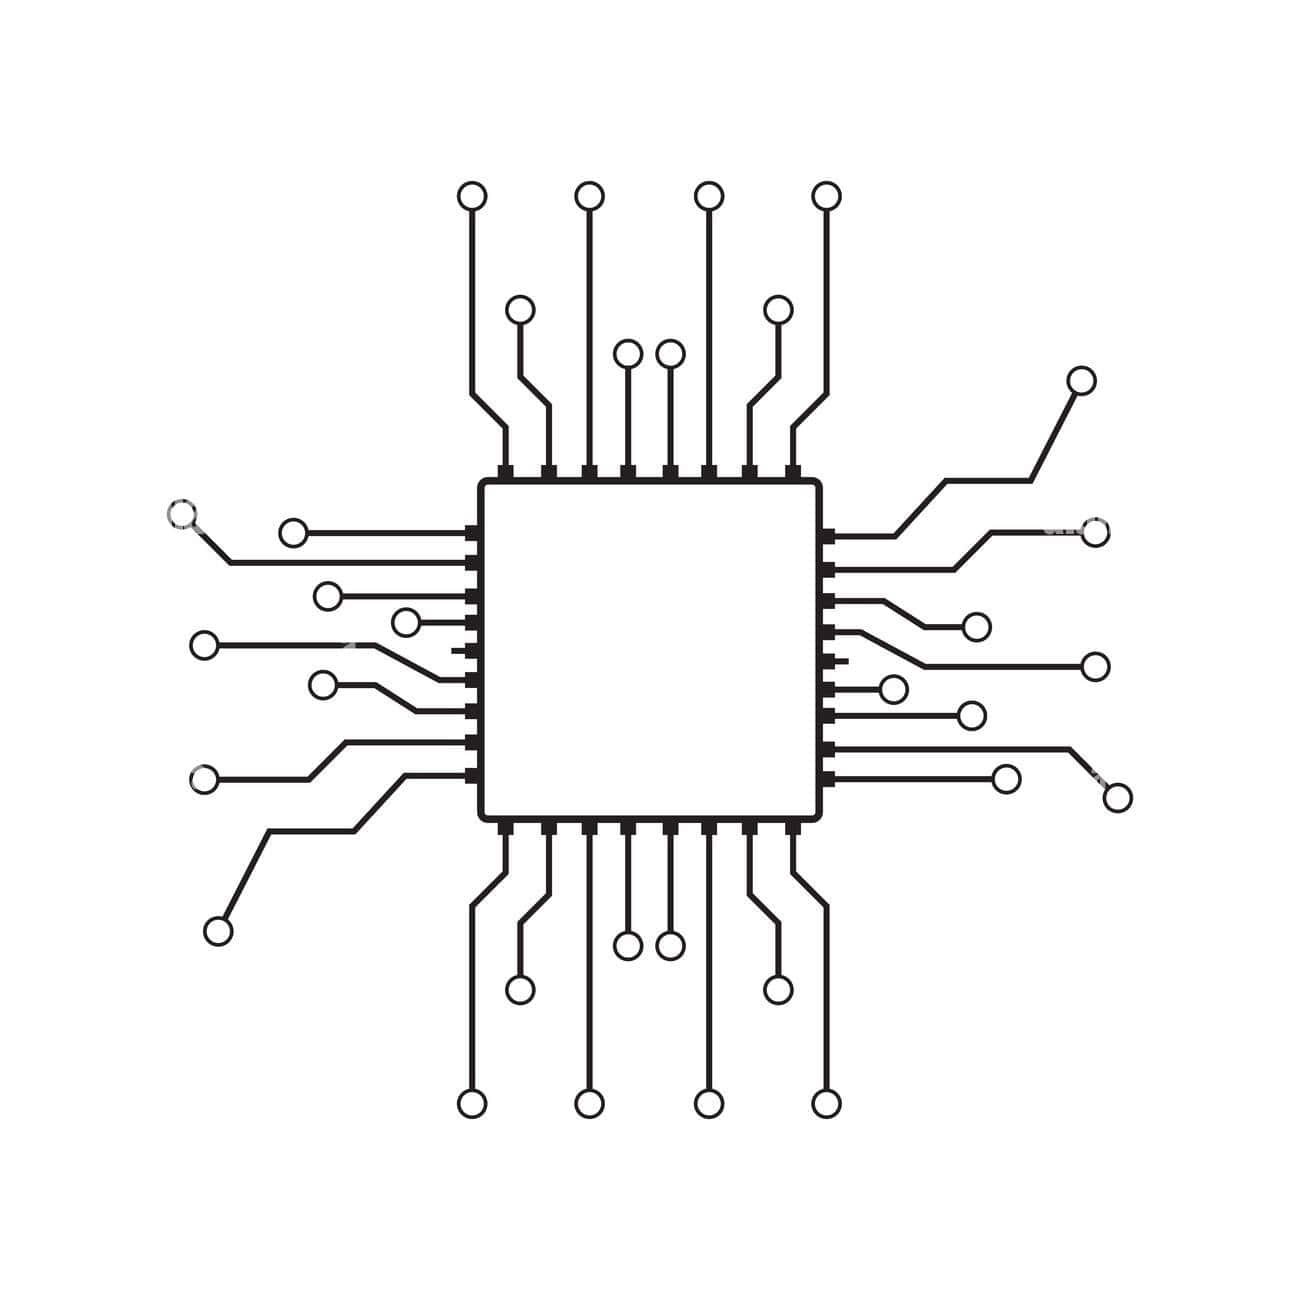 A circuit integrated in a single chip.